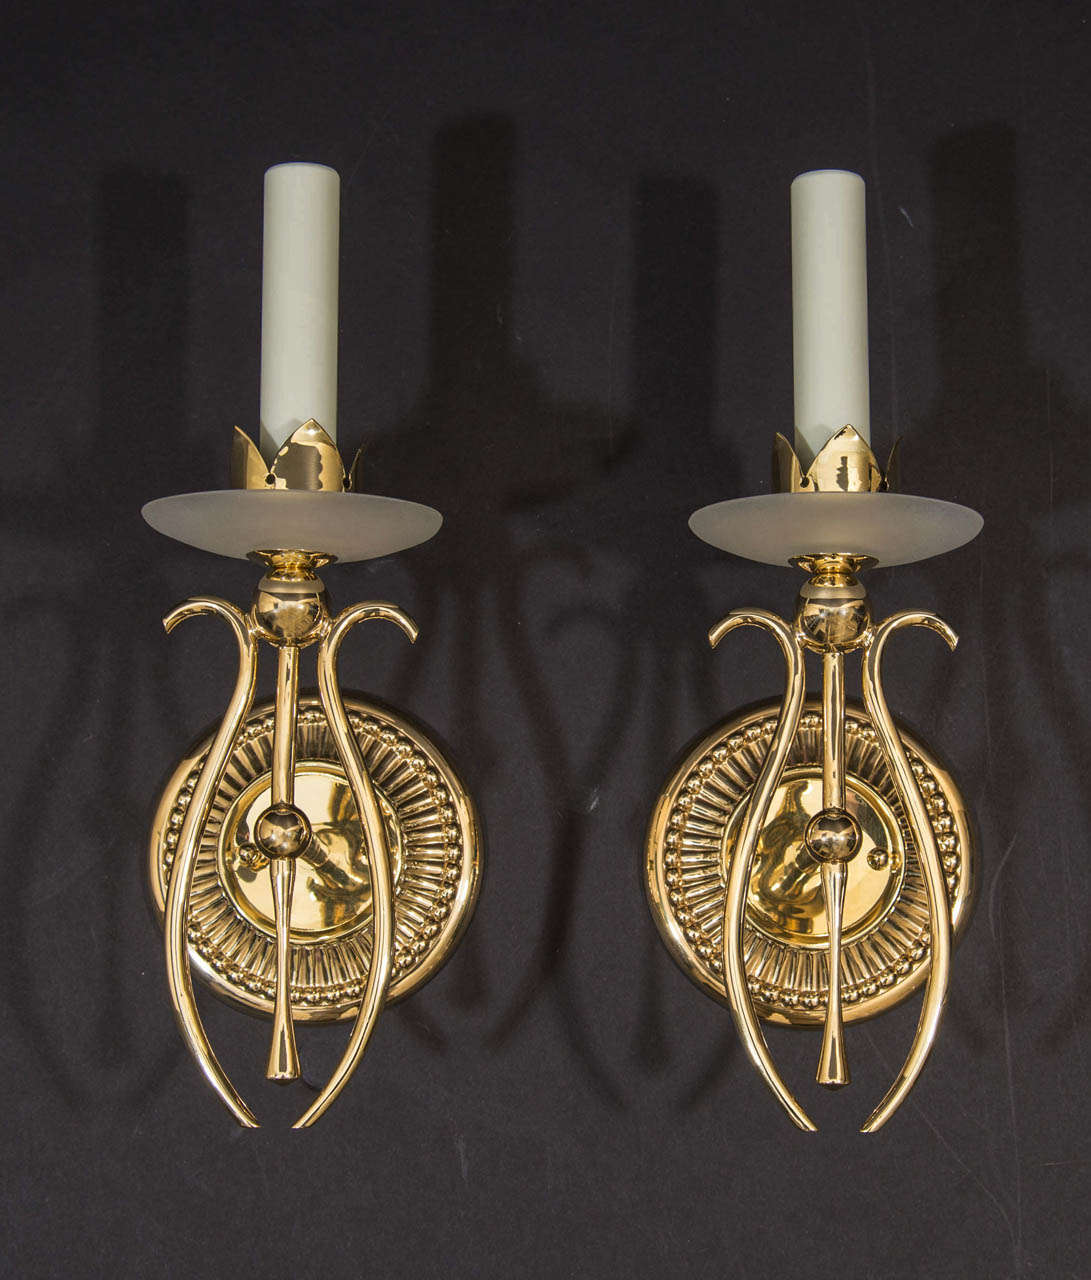 Polished brass one light sconces with frosted glass bobeches, Mid Century.